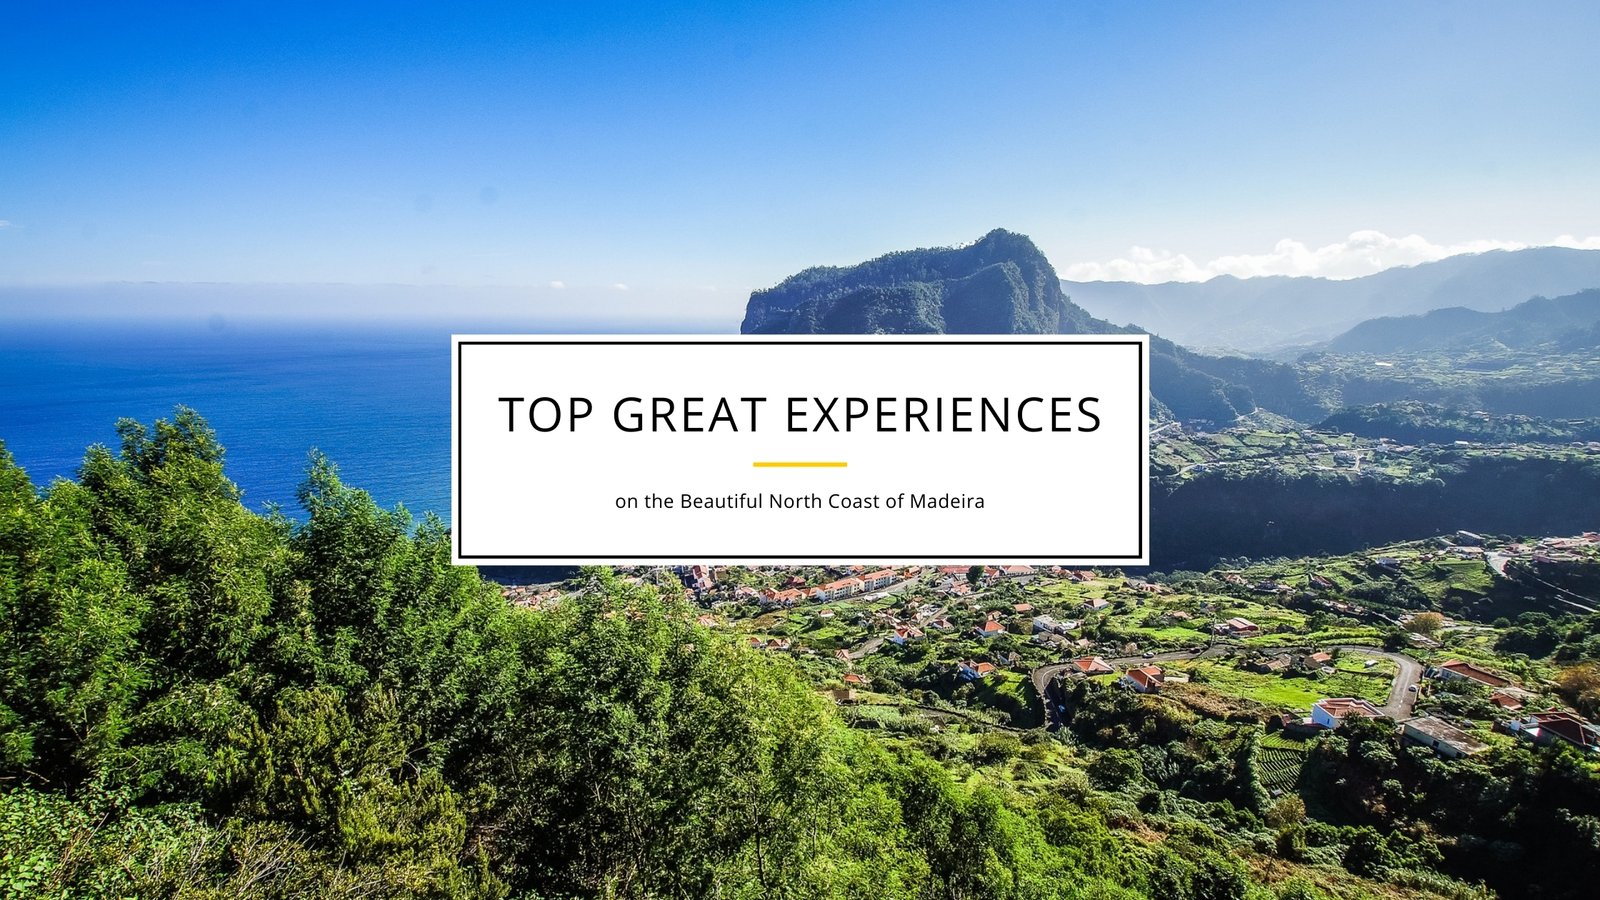 TOP Great Experiences on the Beautiful North Coast of Madeira!